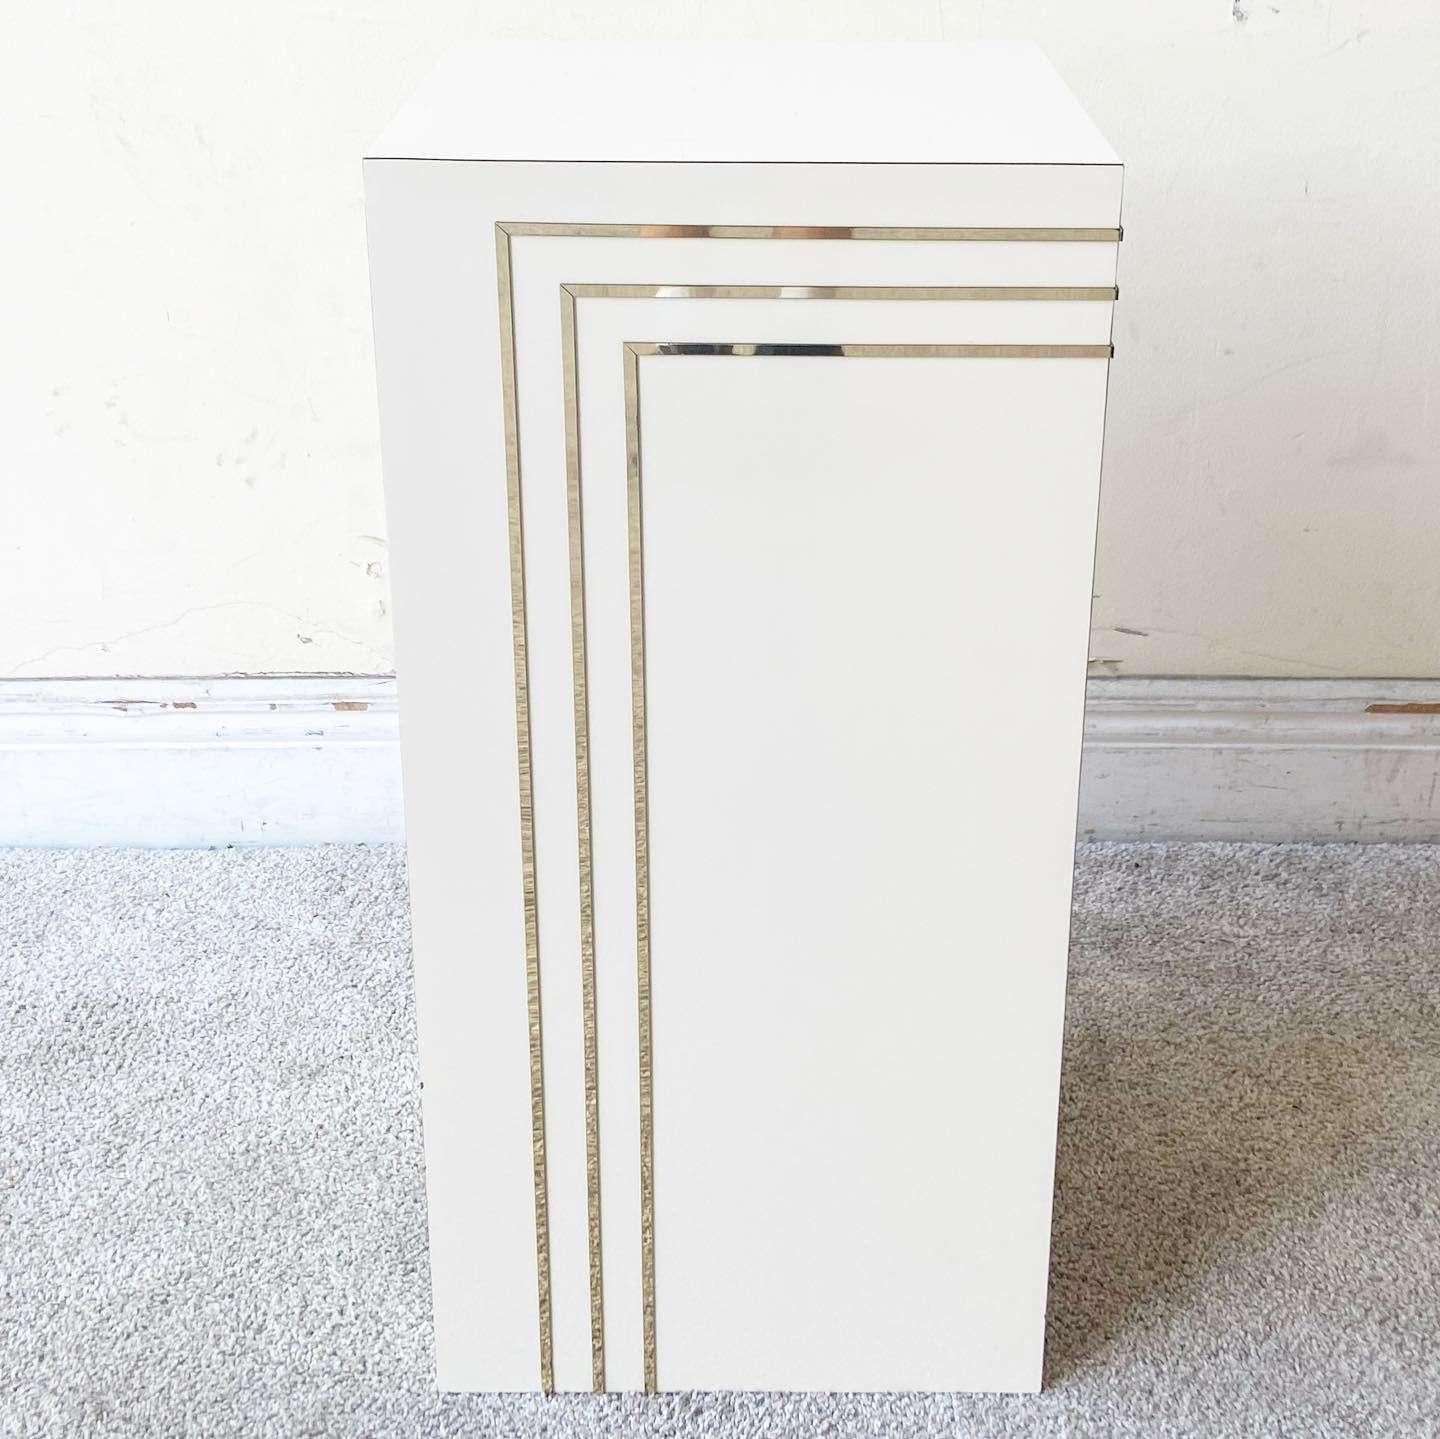 Late 20th Century Art Deco Cream Lacquer Laminate Pedestal With Gold Accents For Sale